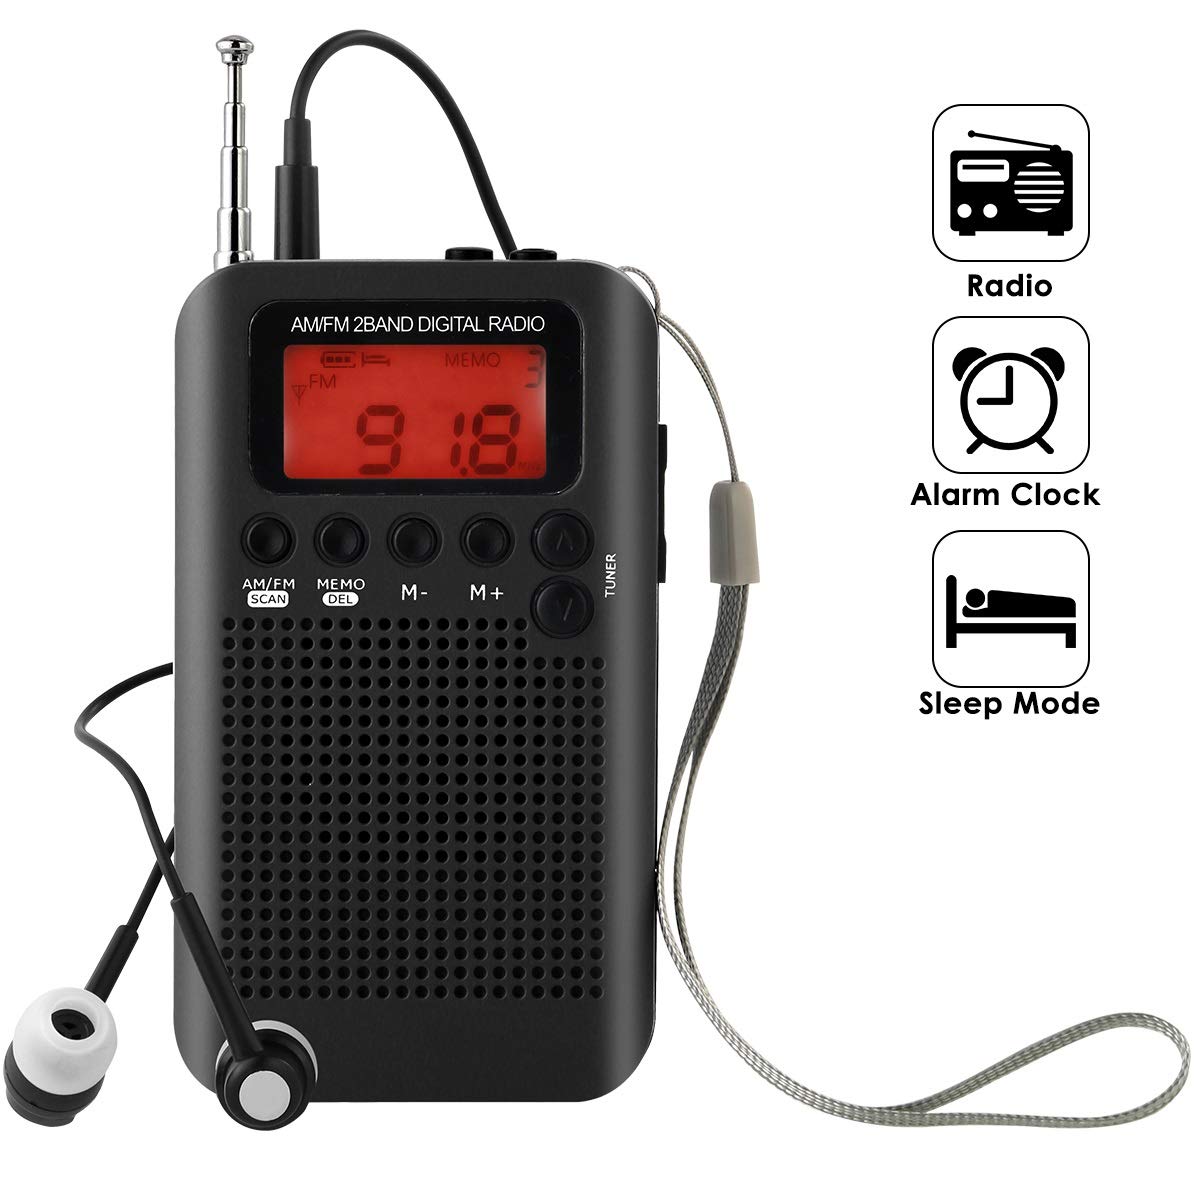 Portable AM FM Two Band Radio with Alarm Clock & Sleep Timer Digital Tuning Stereo Radio with 3.5mm Headphone Jack for Walking Jogging Camping black